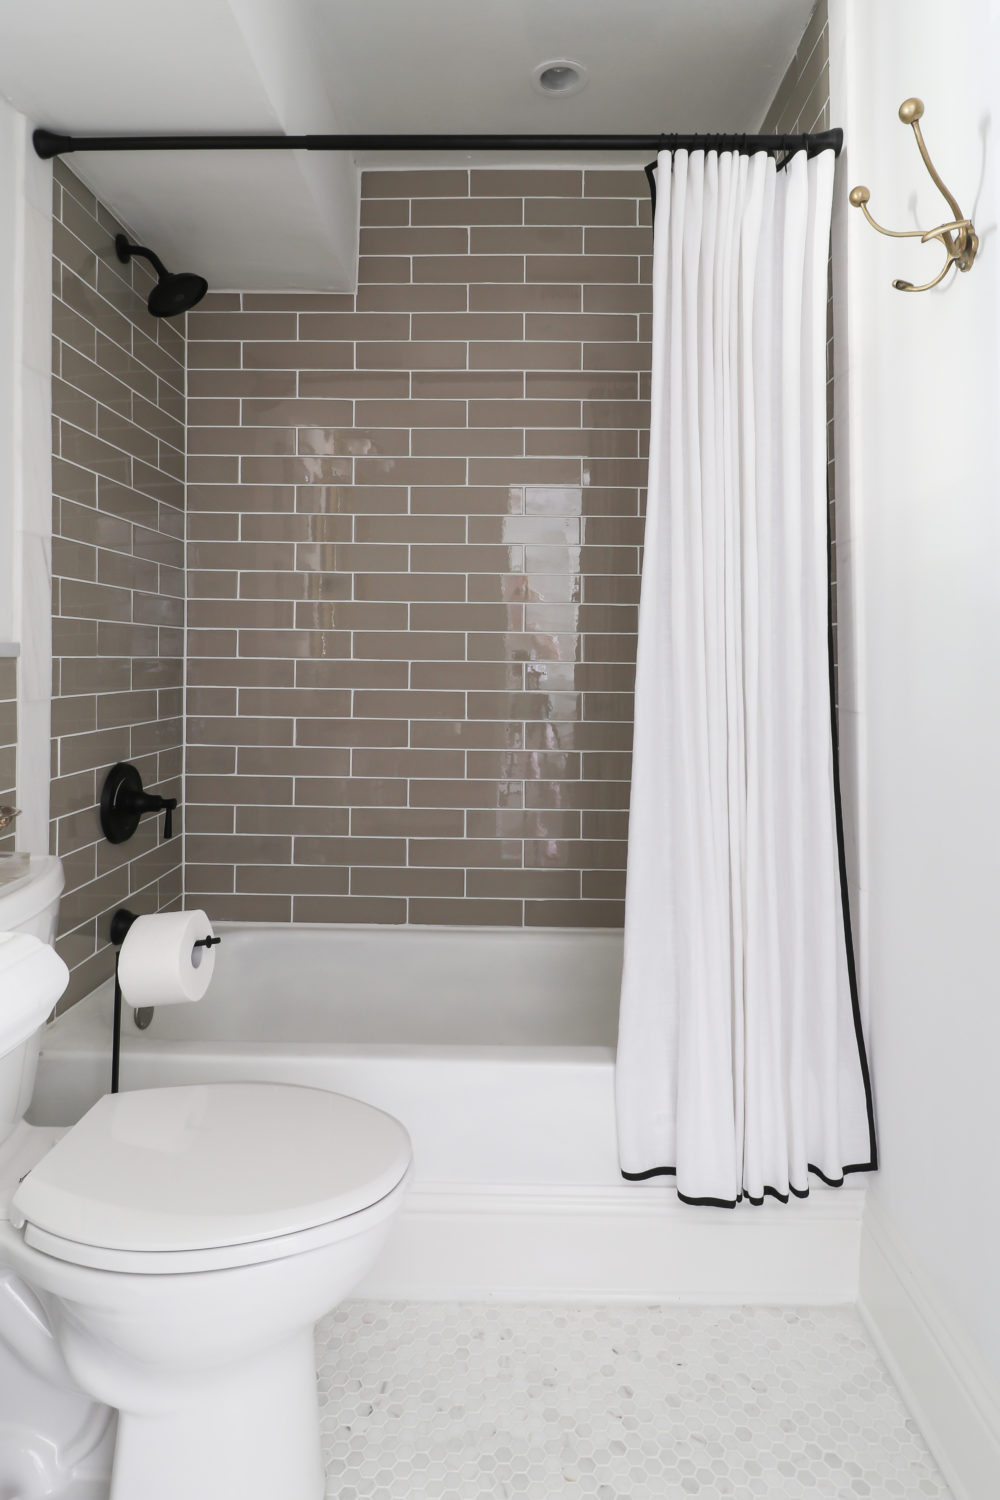 Bathroom featuring taupe subway tile shower and white marble hex flooring